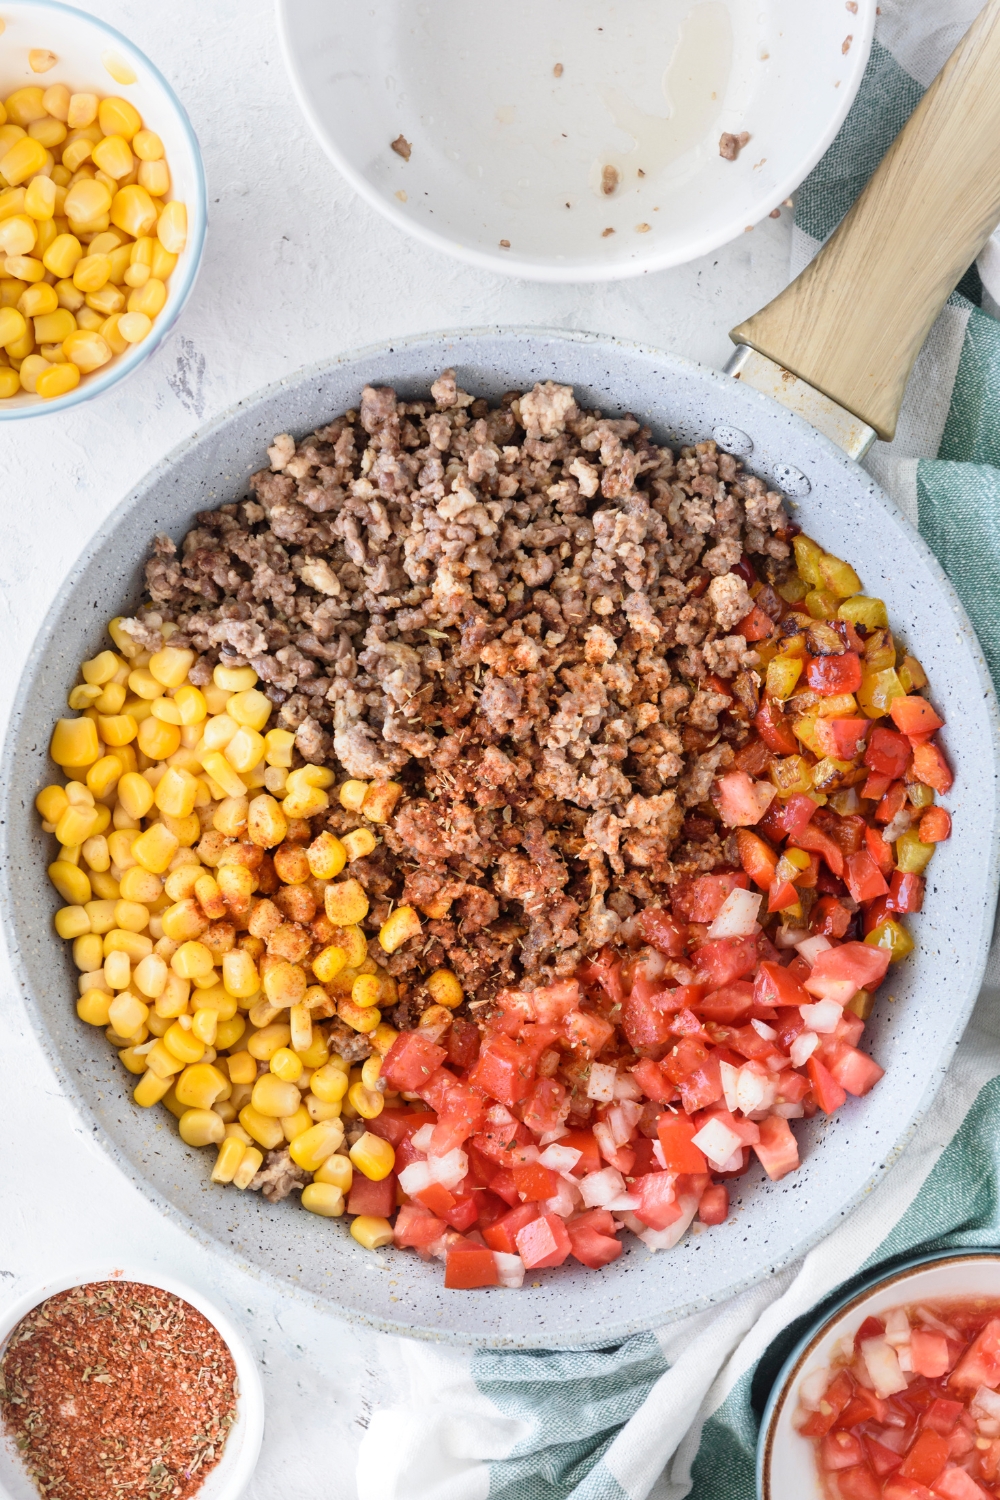 A skillet filled with cooked ground beef, seasoning, diced peppers, corn, and diced tomatoes and onions.